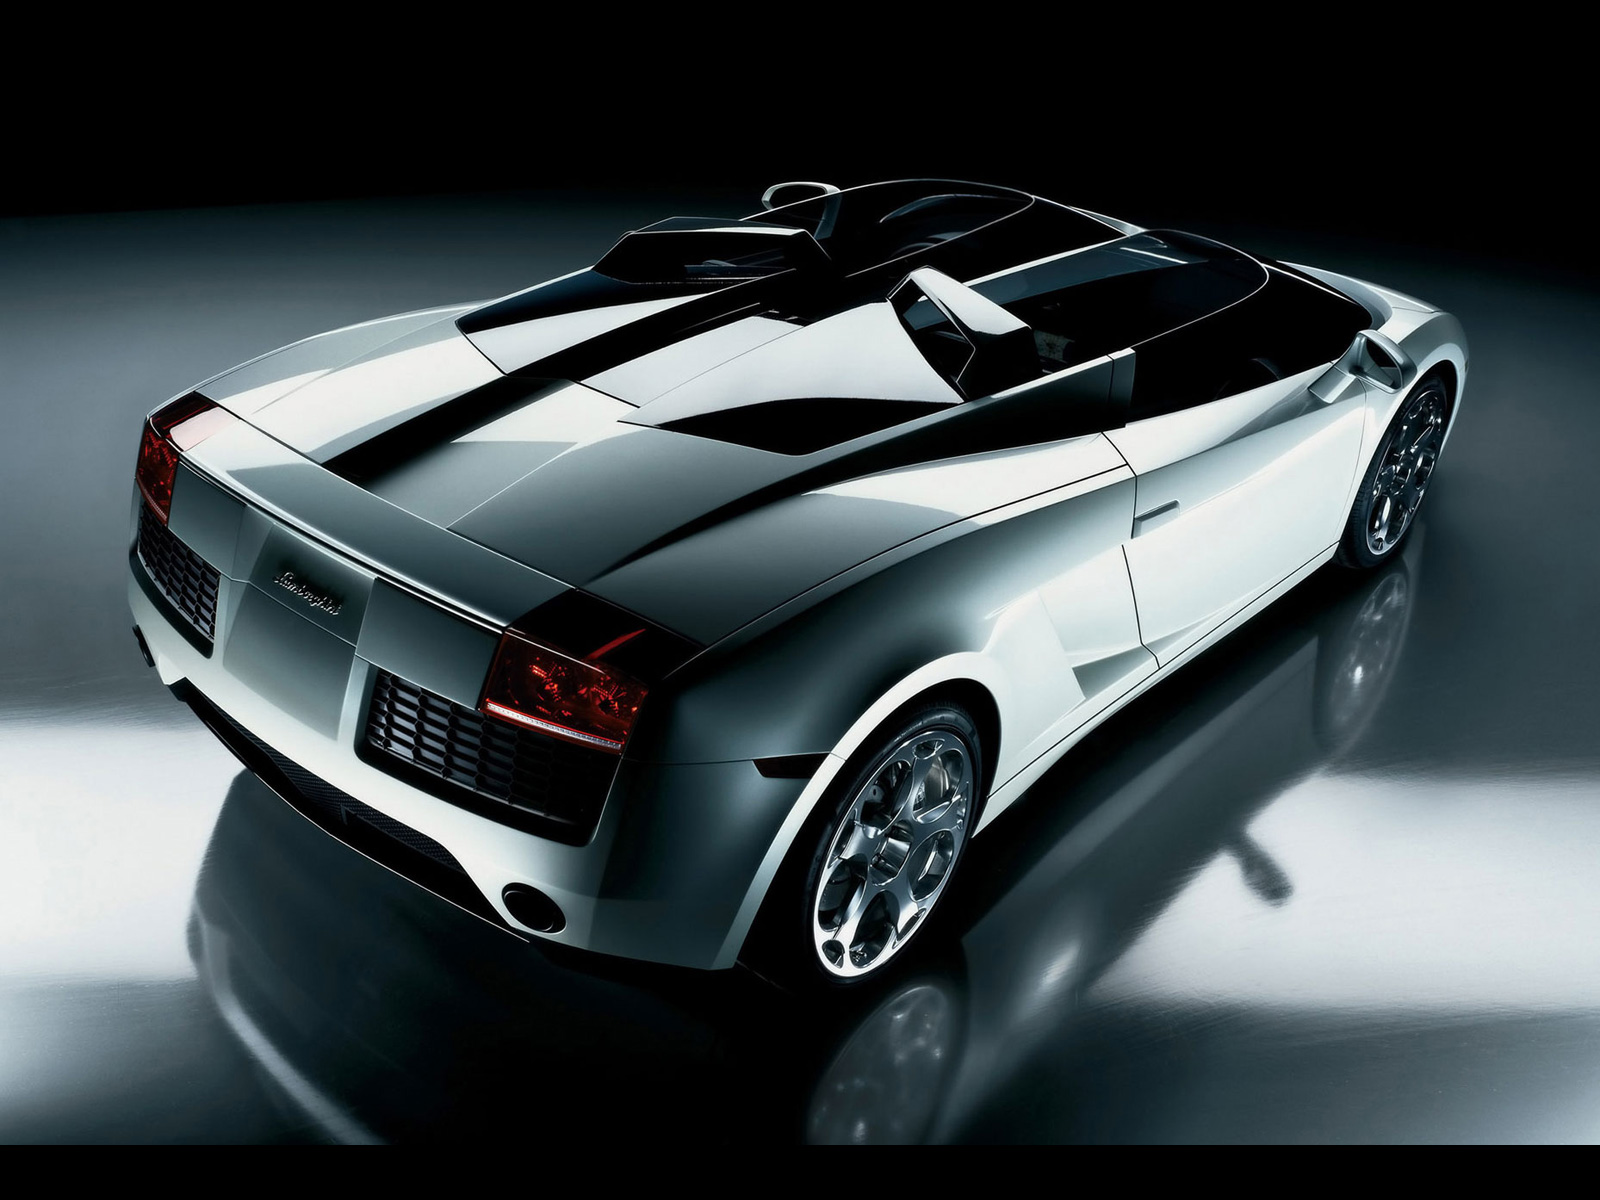 Top 100 Cars HQ Wallpapers 1600x1200 - Photo 6 of 100 | phombo.com